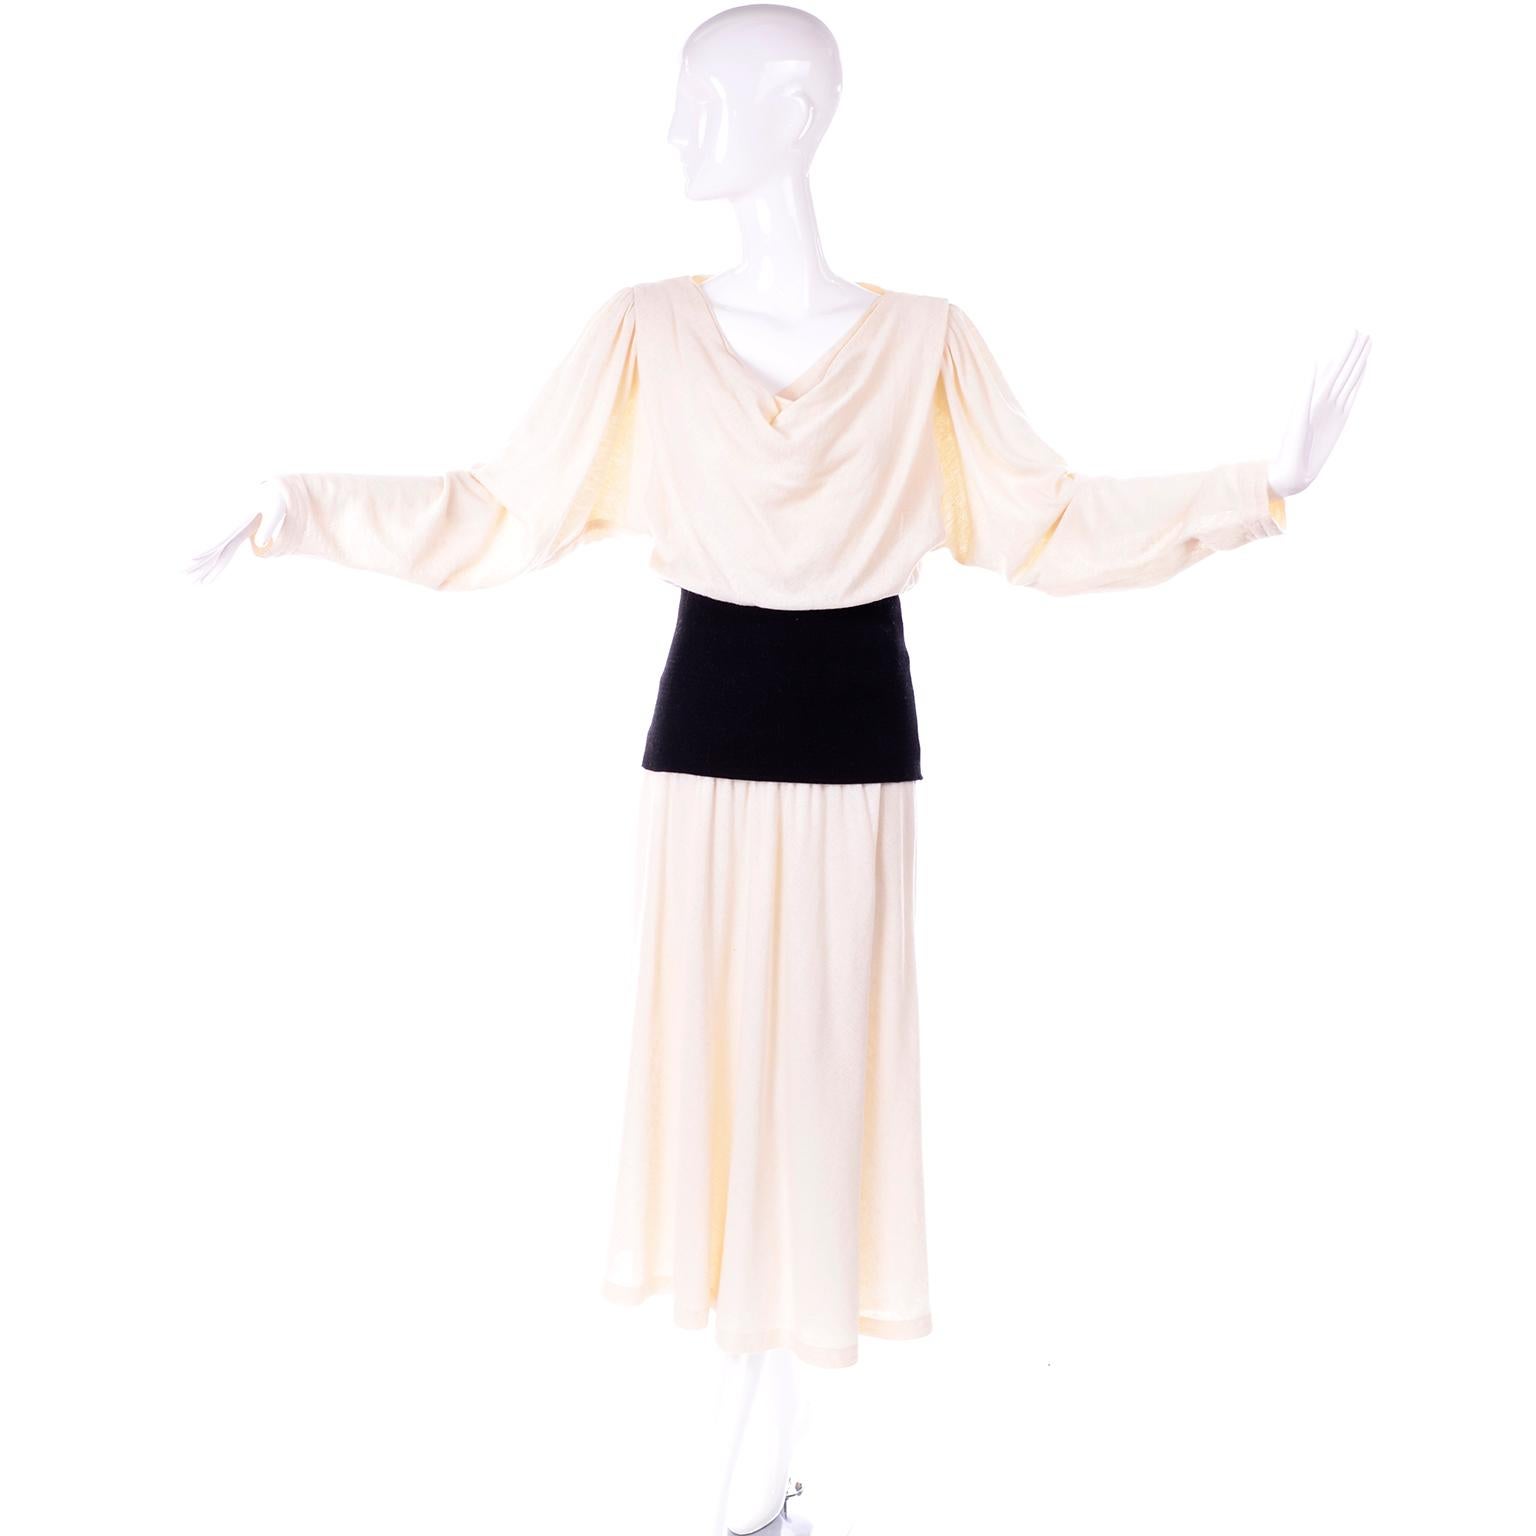 This is a wonderful vintage dress from Norma Walters.  We got this dress from a private estate we were fortunate to acquire recently. The estate included many pieces by YSL, Valentino, Oscar de la Renta, and several Norma Walters dresses.  We always